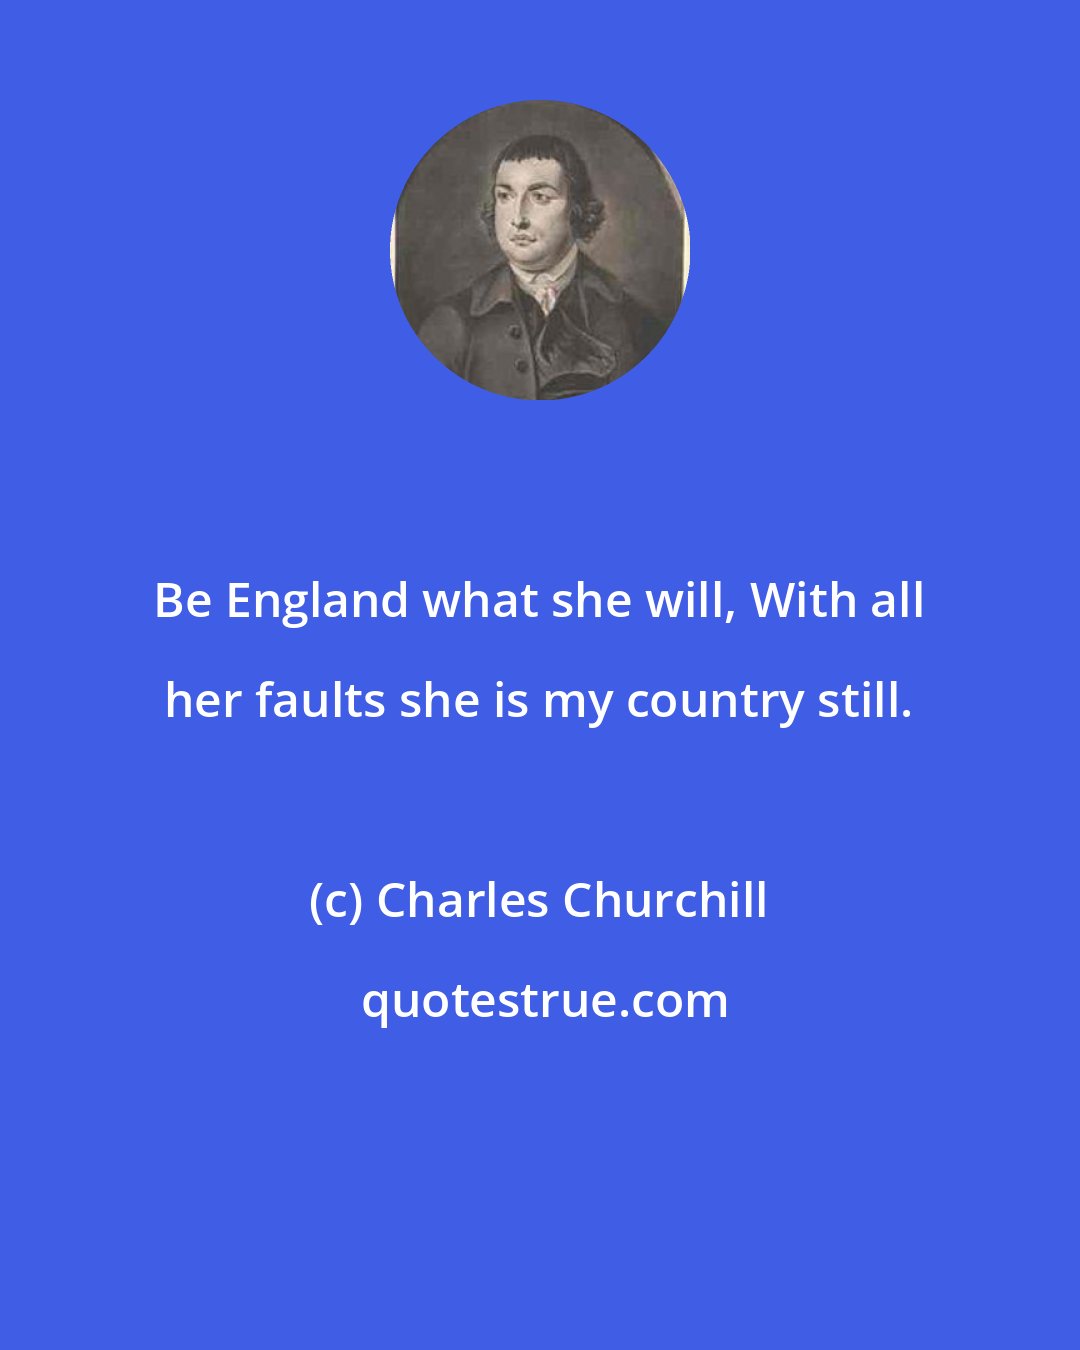 Charles Churchill: Be England what she will, With all her faults she is my country still.